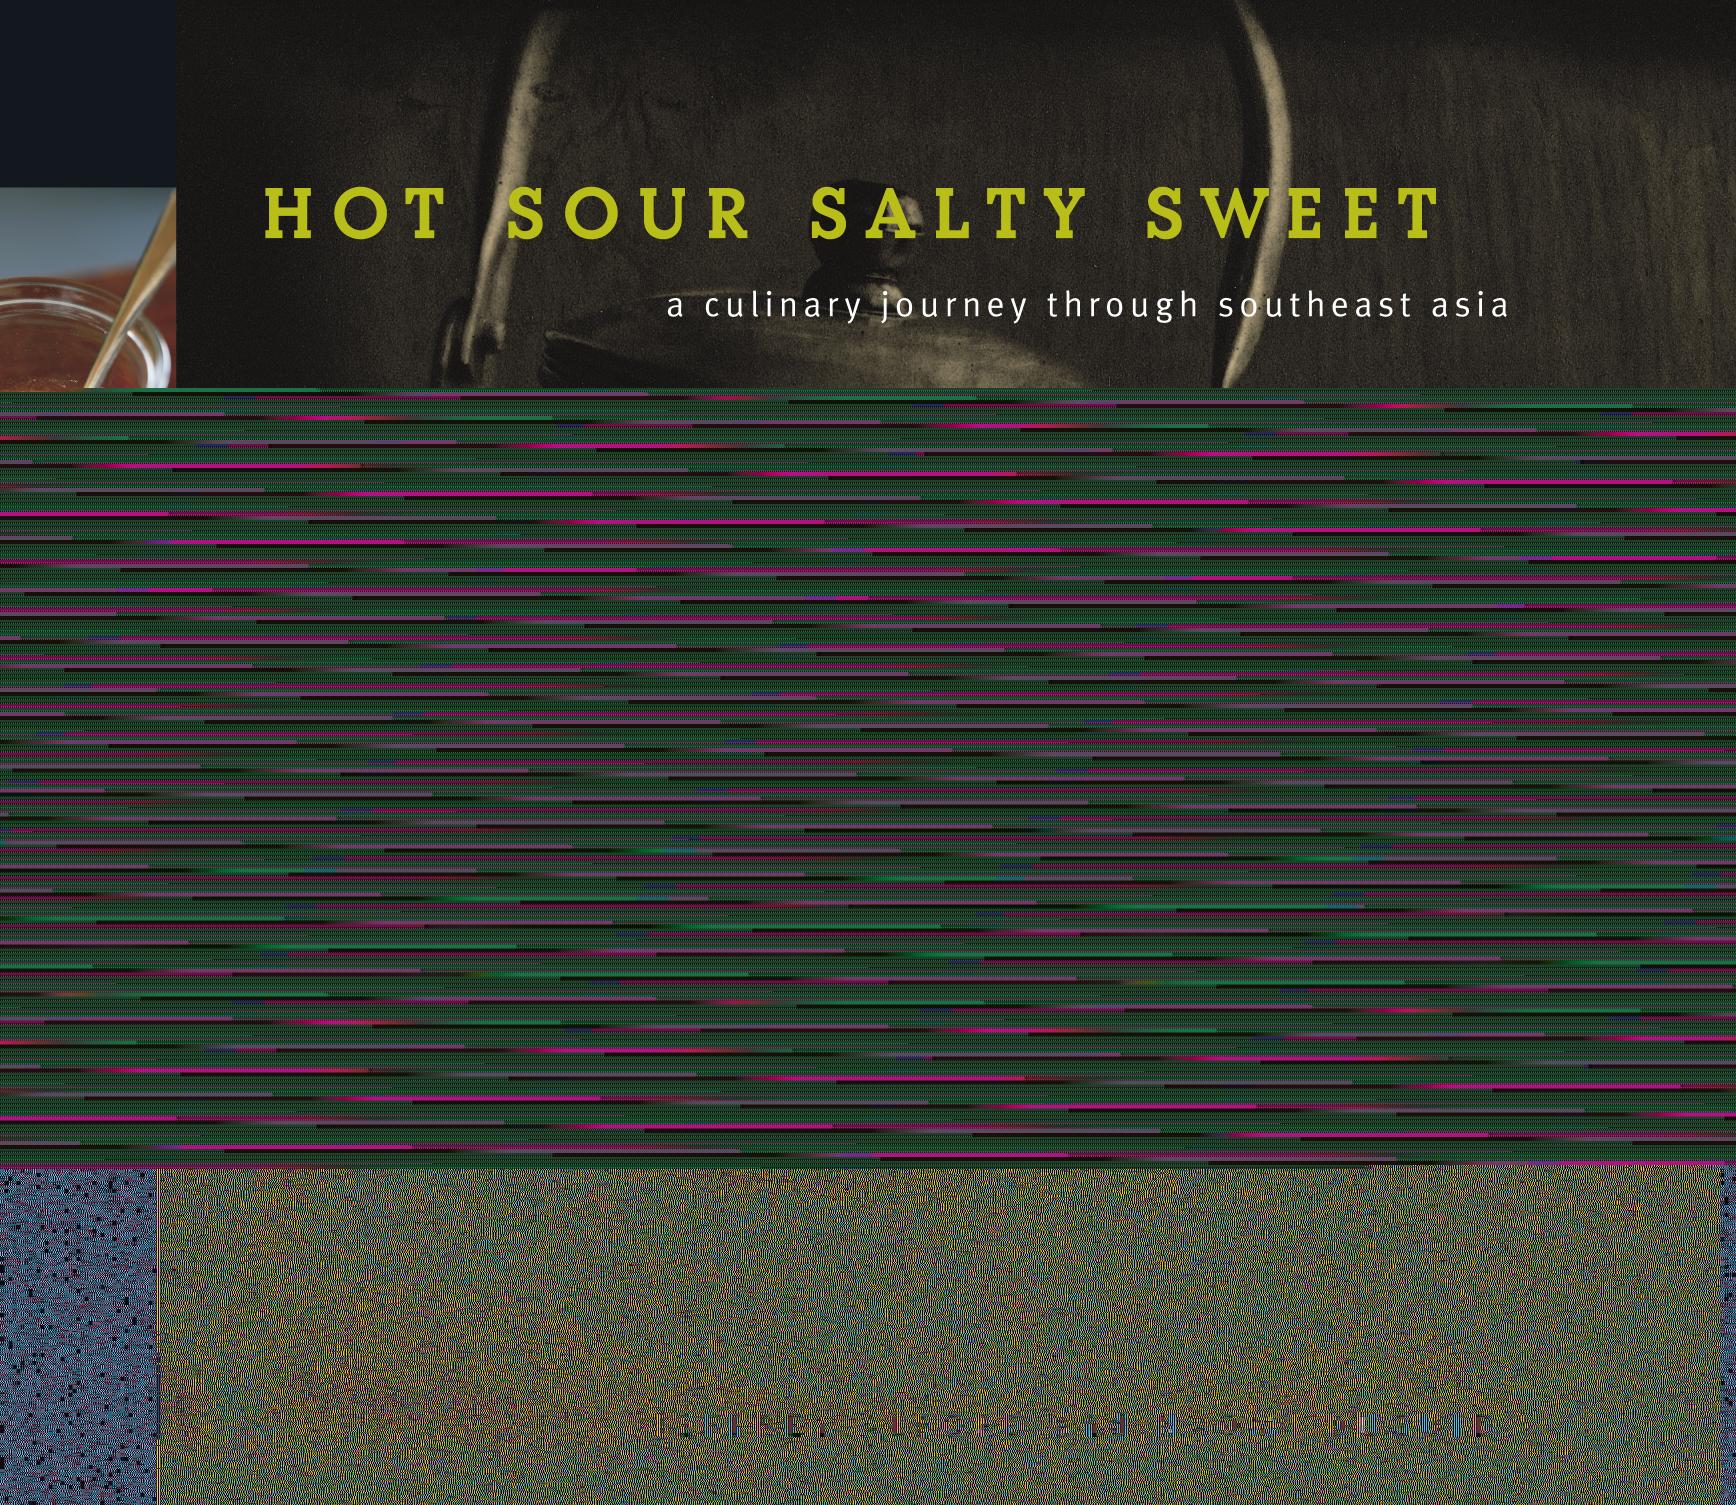 Hot Sour Salty Sweet by Jeffrey Alford